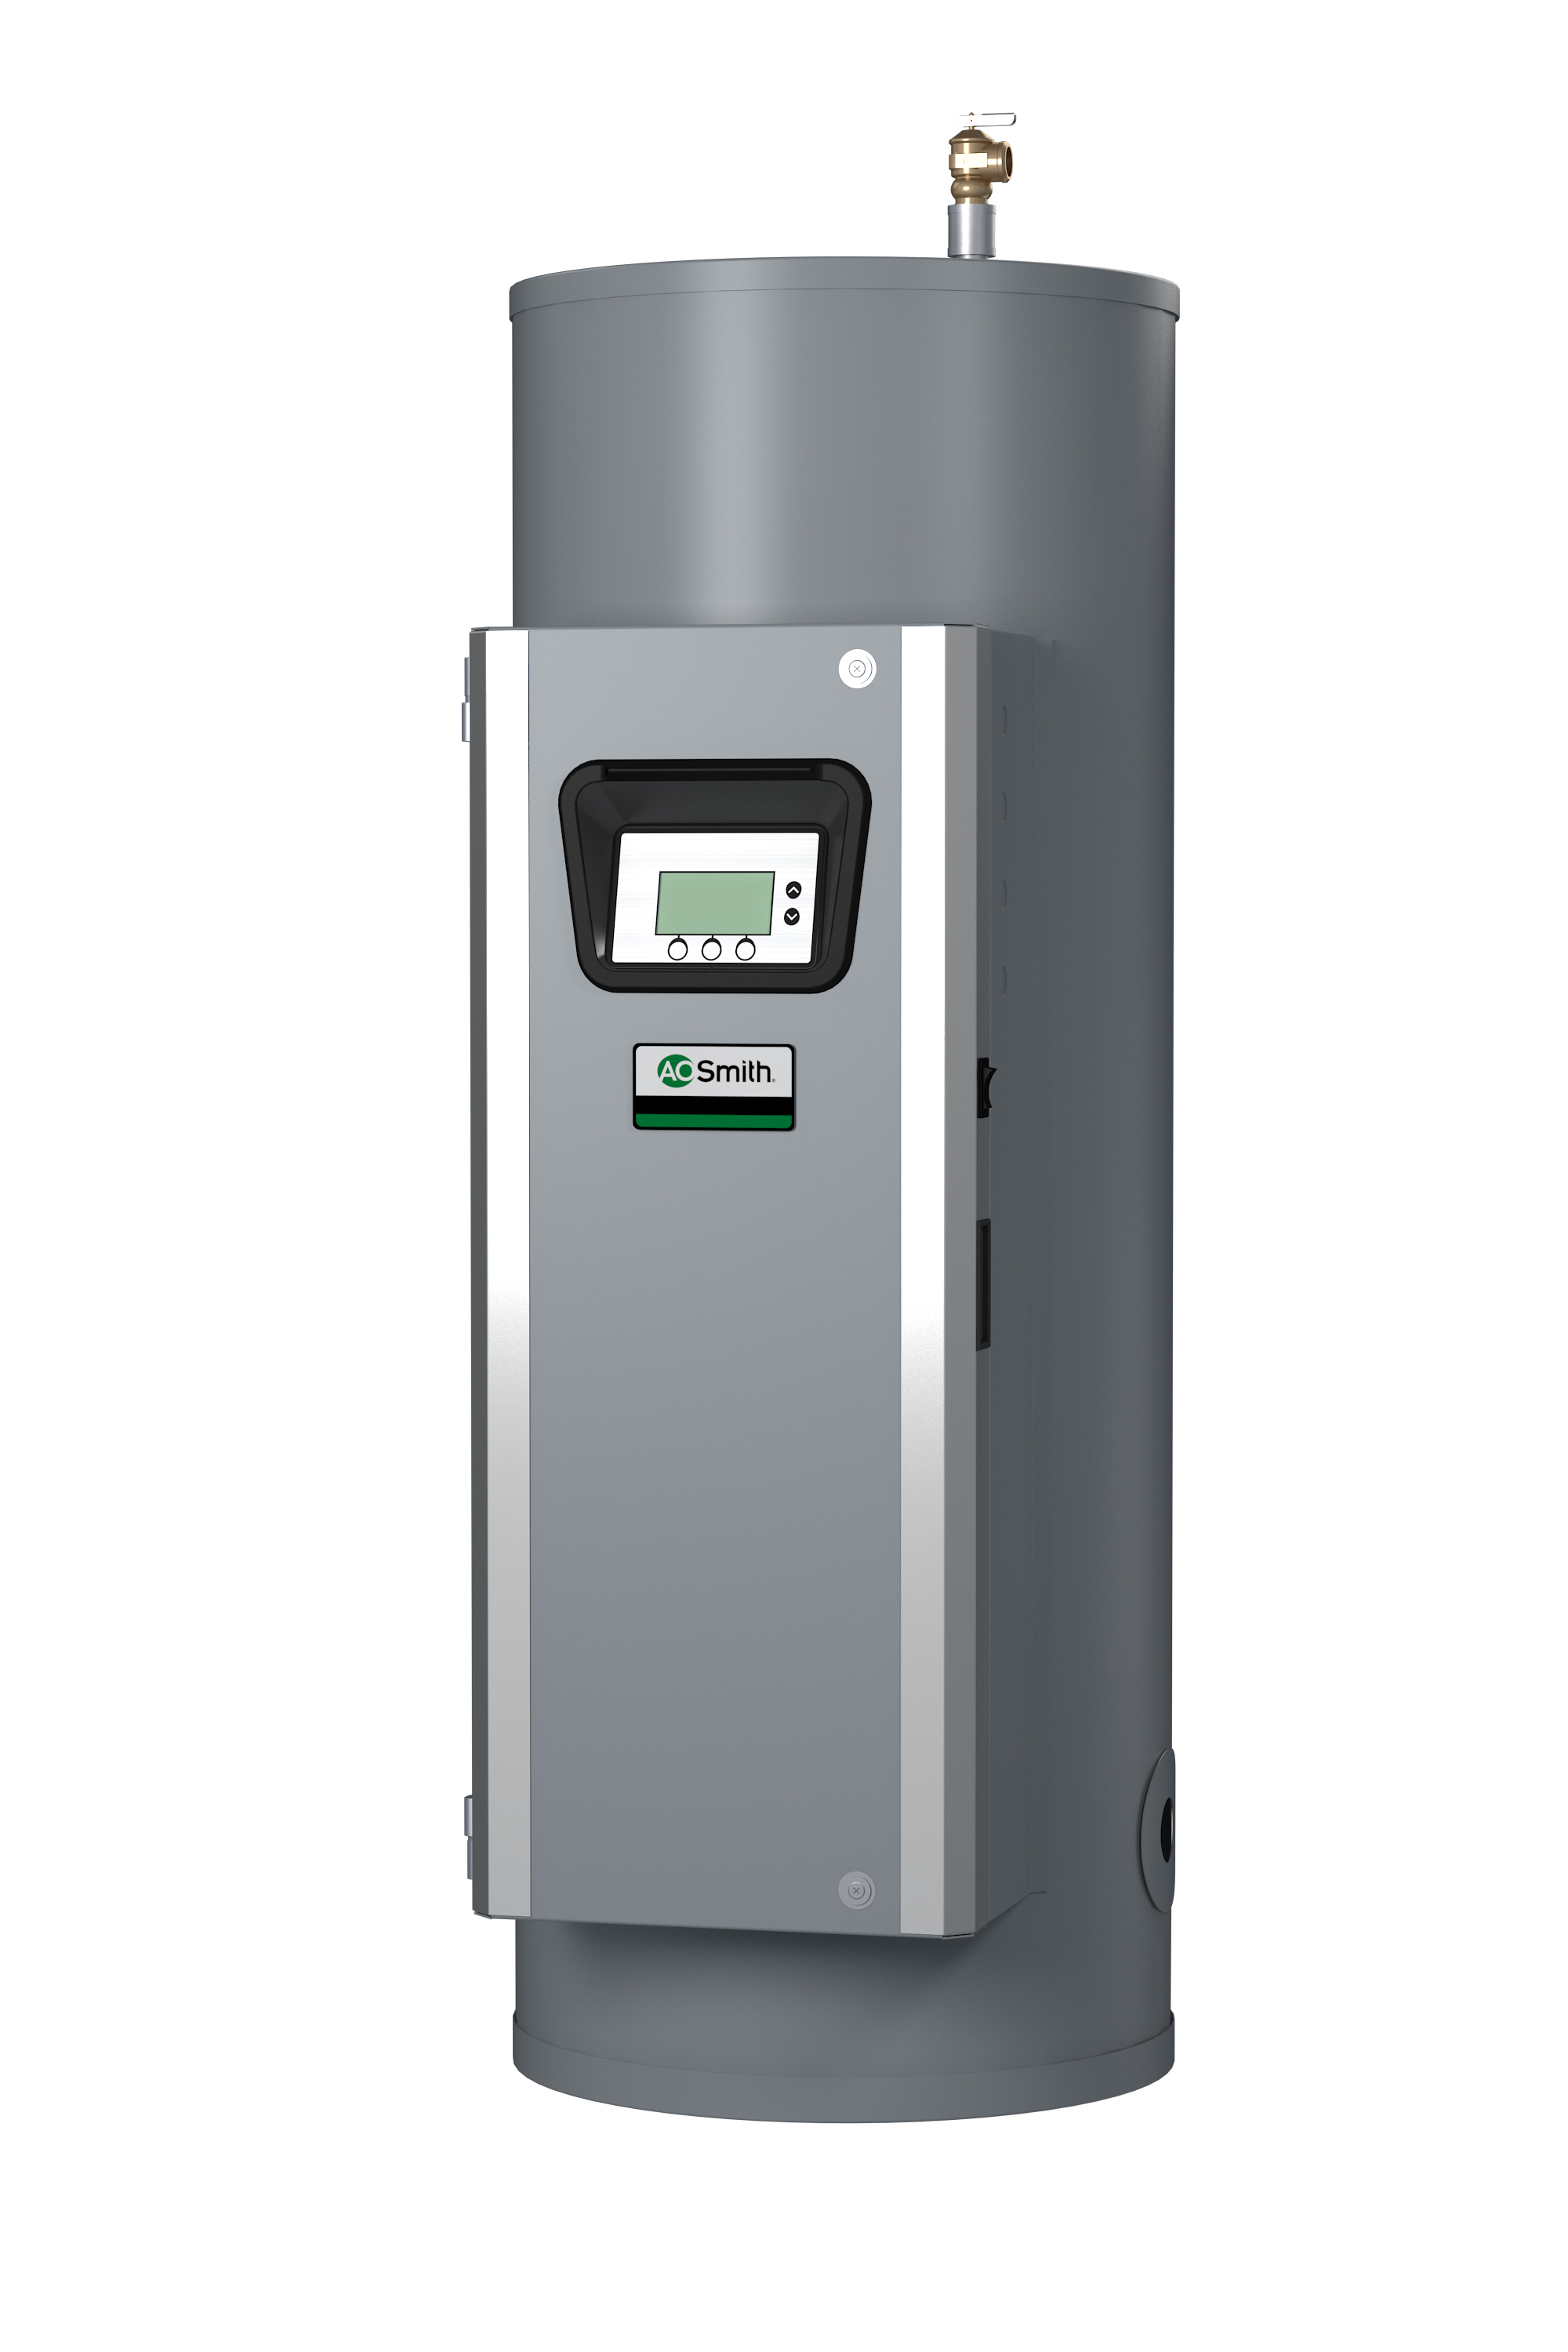 AO SMITH DSE-50A-45, 50 GALLONS, 45KW, 480 VOLT, 93.8 AMPS, 1 PHASE, 3 ELEMENTS, ASME CUSTOM Xi SERIES HEAVY DUTY COMMERCIAL ELECTRIC WATER HEATER